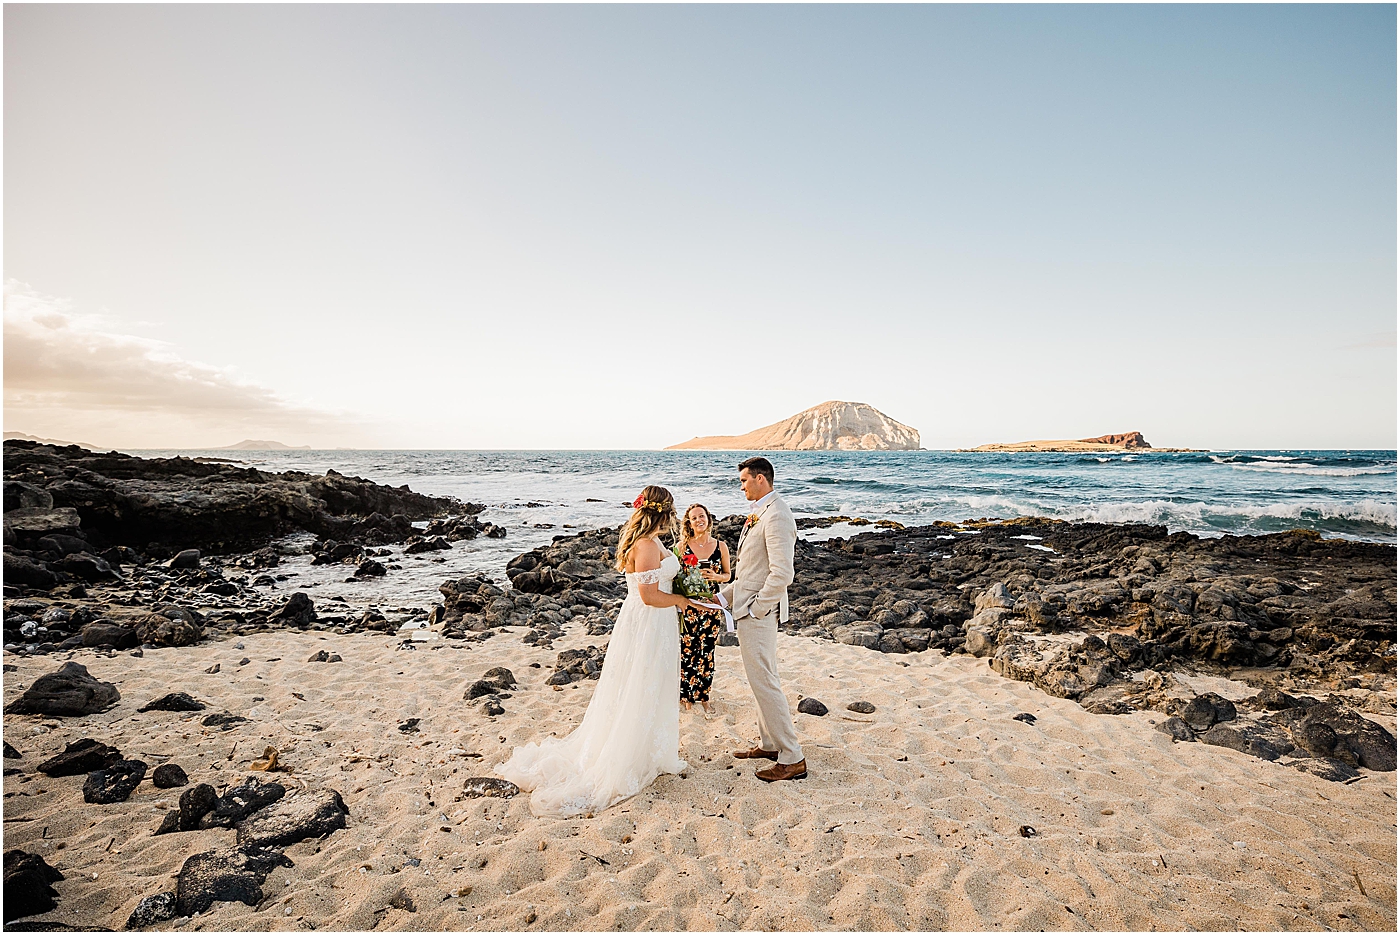 Bride and groom sharing vows in beach wedding in hawaii